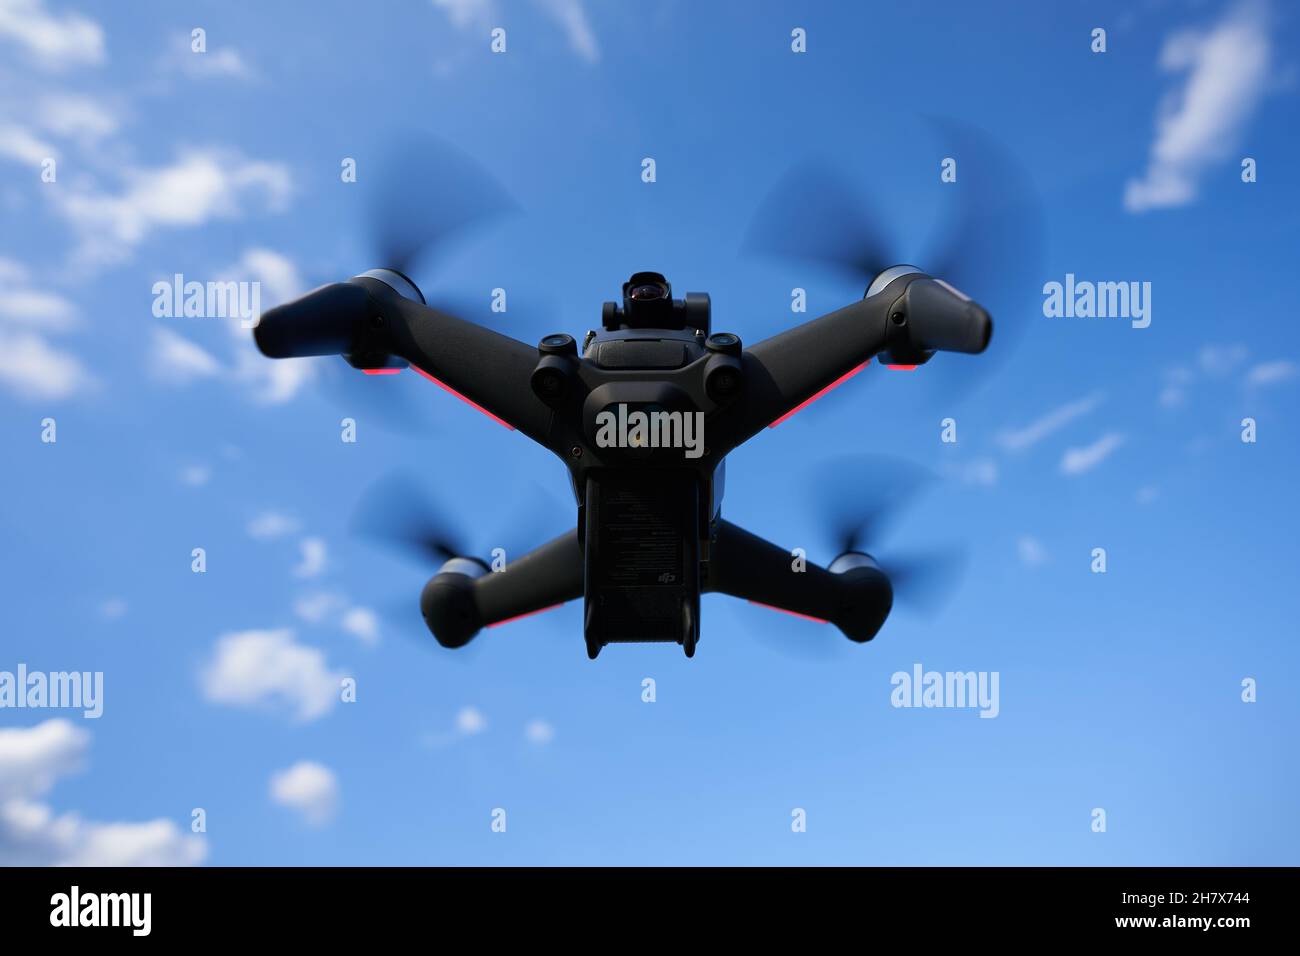 Nürtingen, Germany - June 26, 2021: Black dji fpv drone hovering in front of a blue sky. Racing drone with dark propellers and red lights. Up view. Sy Stock Photo